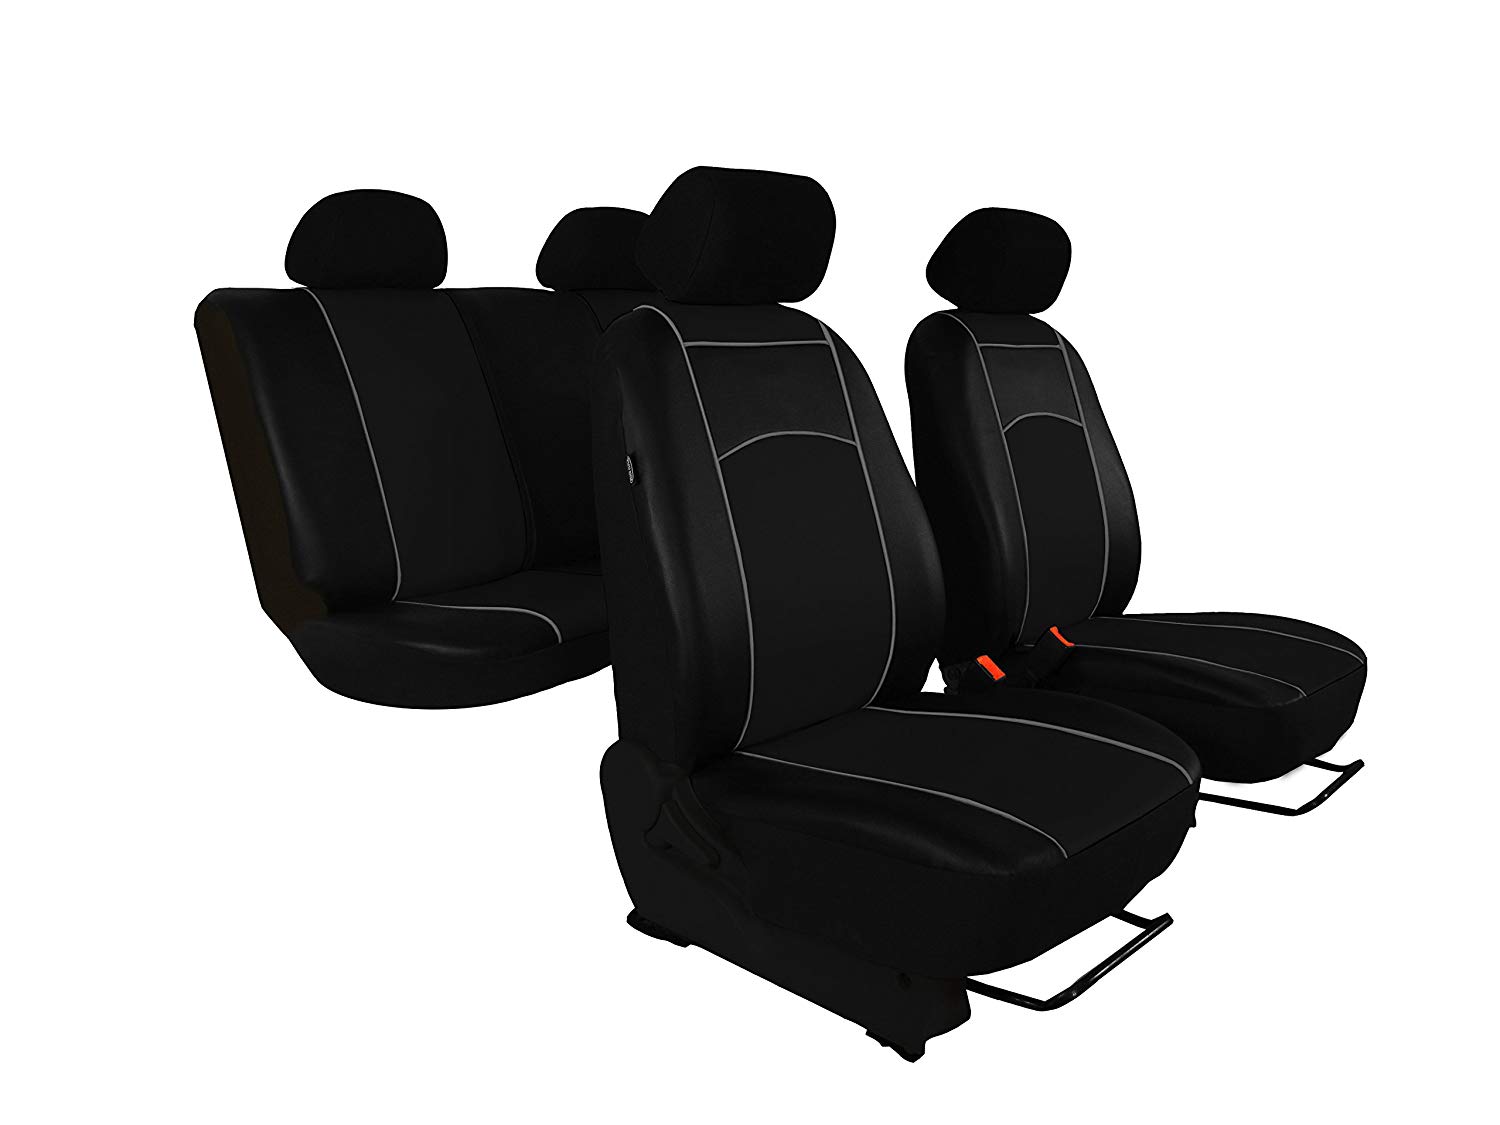 Exclusive Custom, High Quality For VW Passat B3 with Eco Leather Seat Covers Design in 7 Colours.